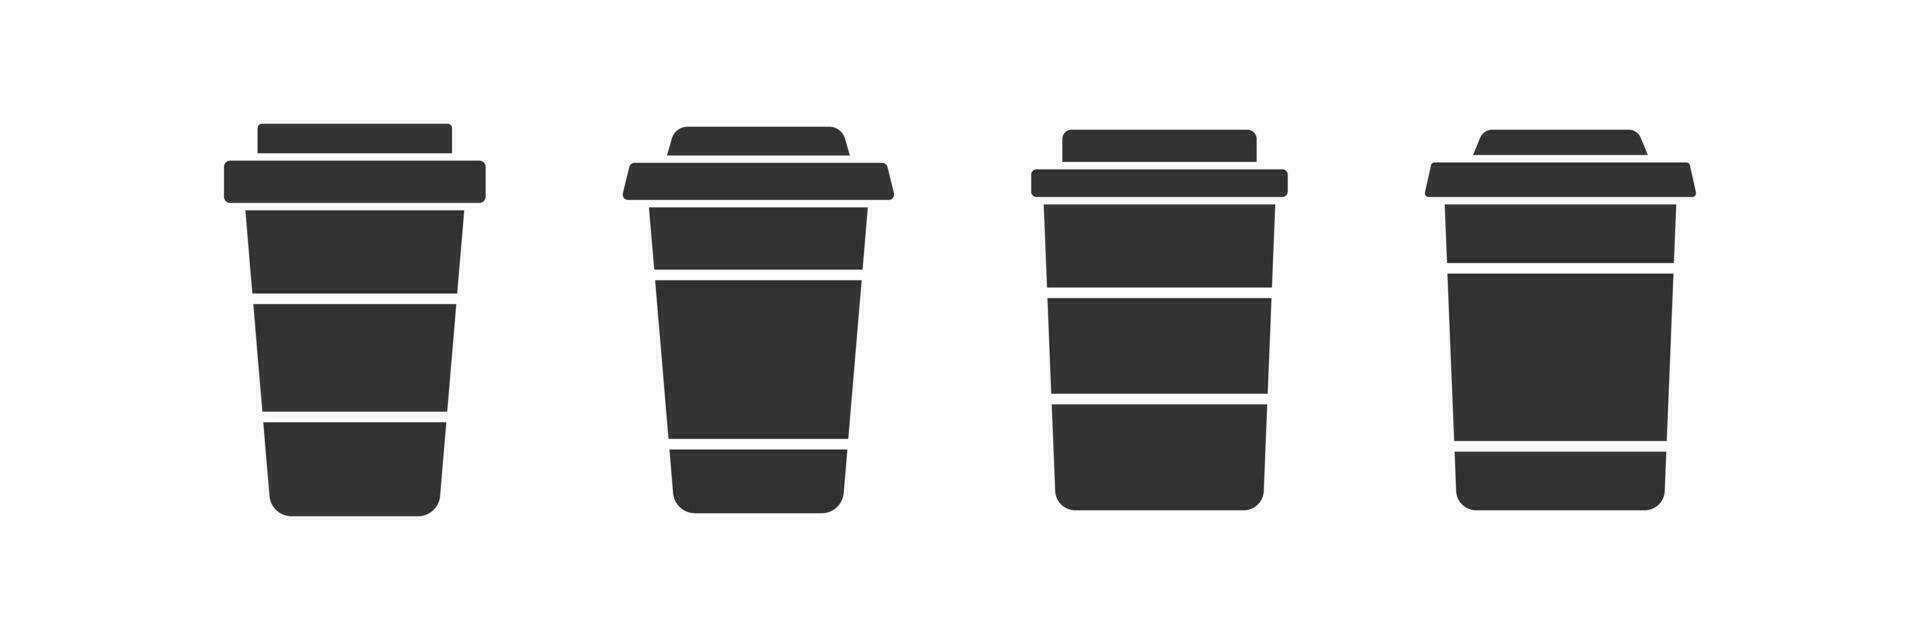 Paper cup of coffee icon. Takeaway cafe signs. Hot latte, cappuccino, tea symbol. Plastic mug symbols. Drink beverage energy in the morning icons. Black color. Vector isolated sign.